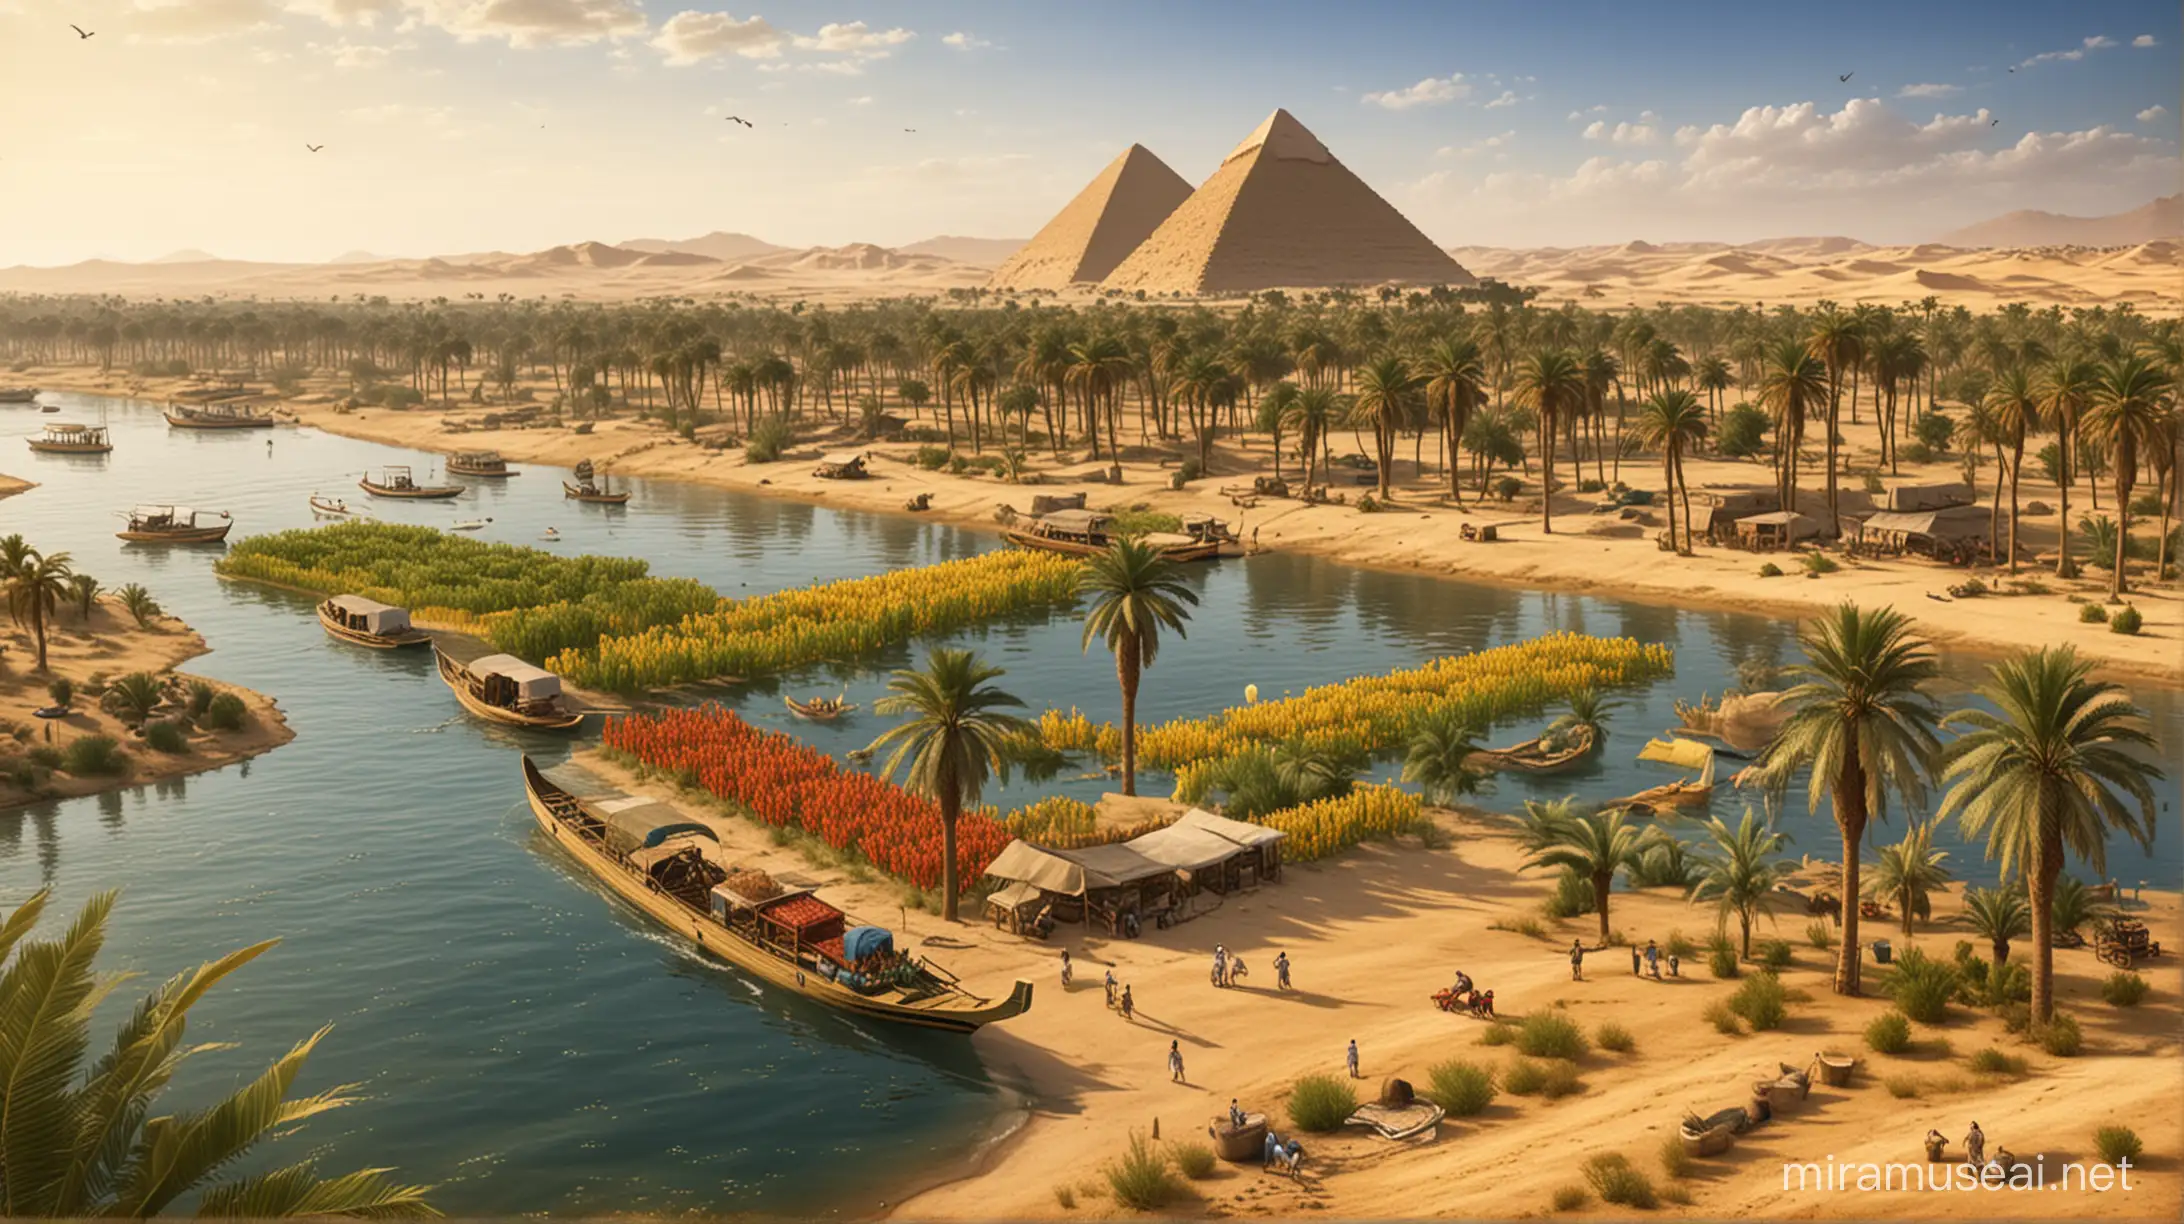 Create scenes of bountiful harvests and surplus crops resulting from the Egyptians' skillful management of the Nile.